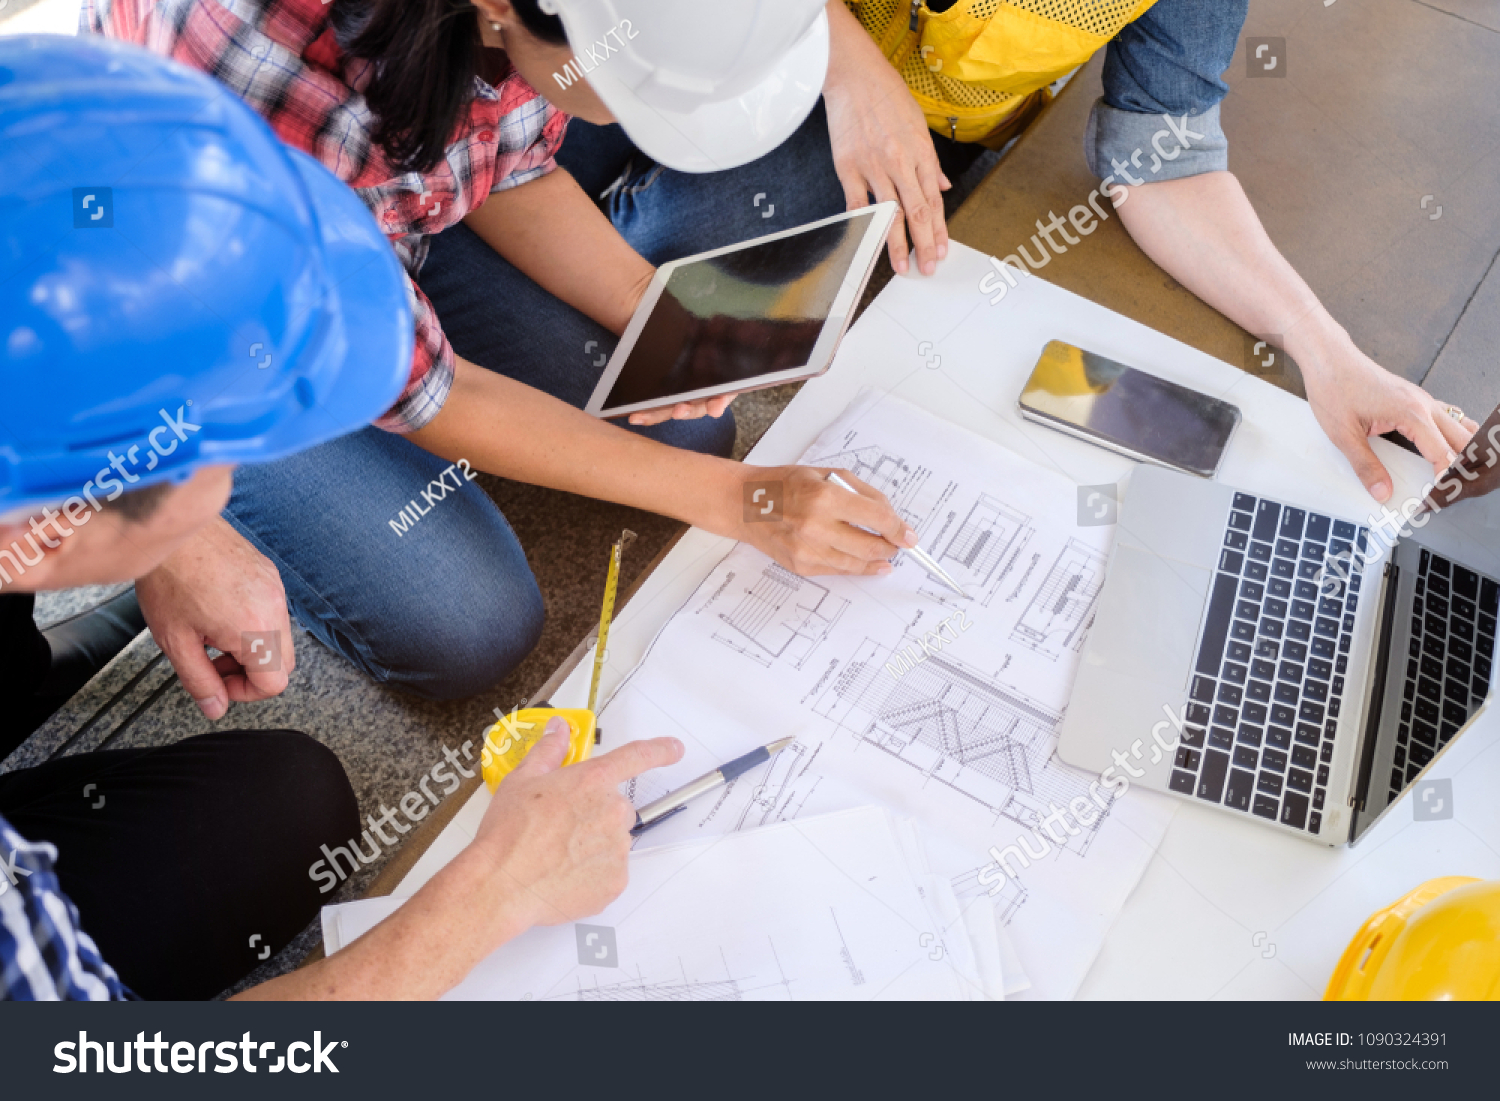 multiethnic diverse team of engineers discussing about new project in city, engineer man and woman work with blueprint in front of building, business people co-working teamwork concept,focus on hand #1090324391